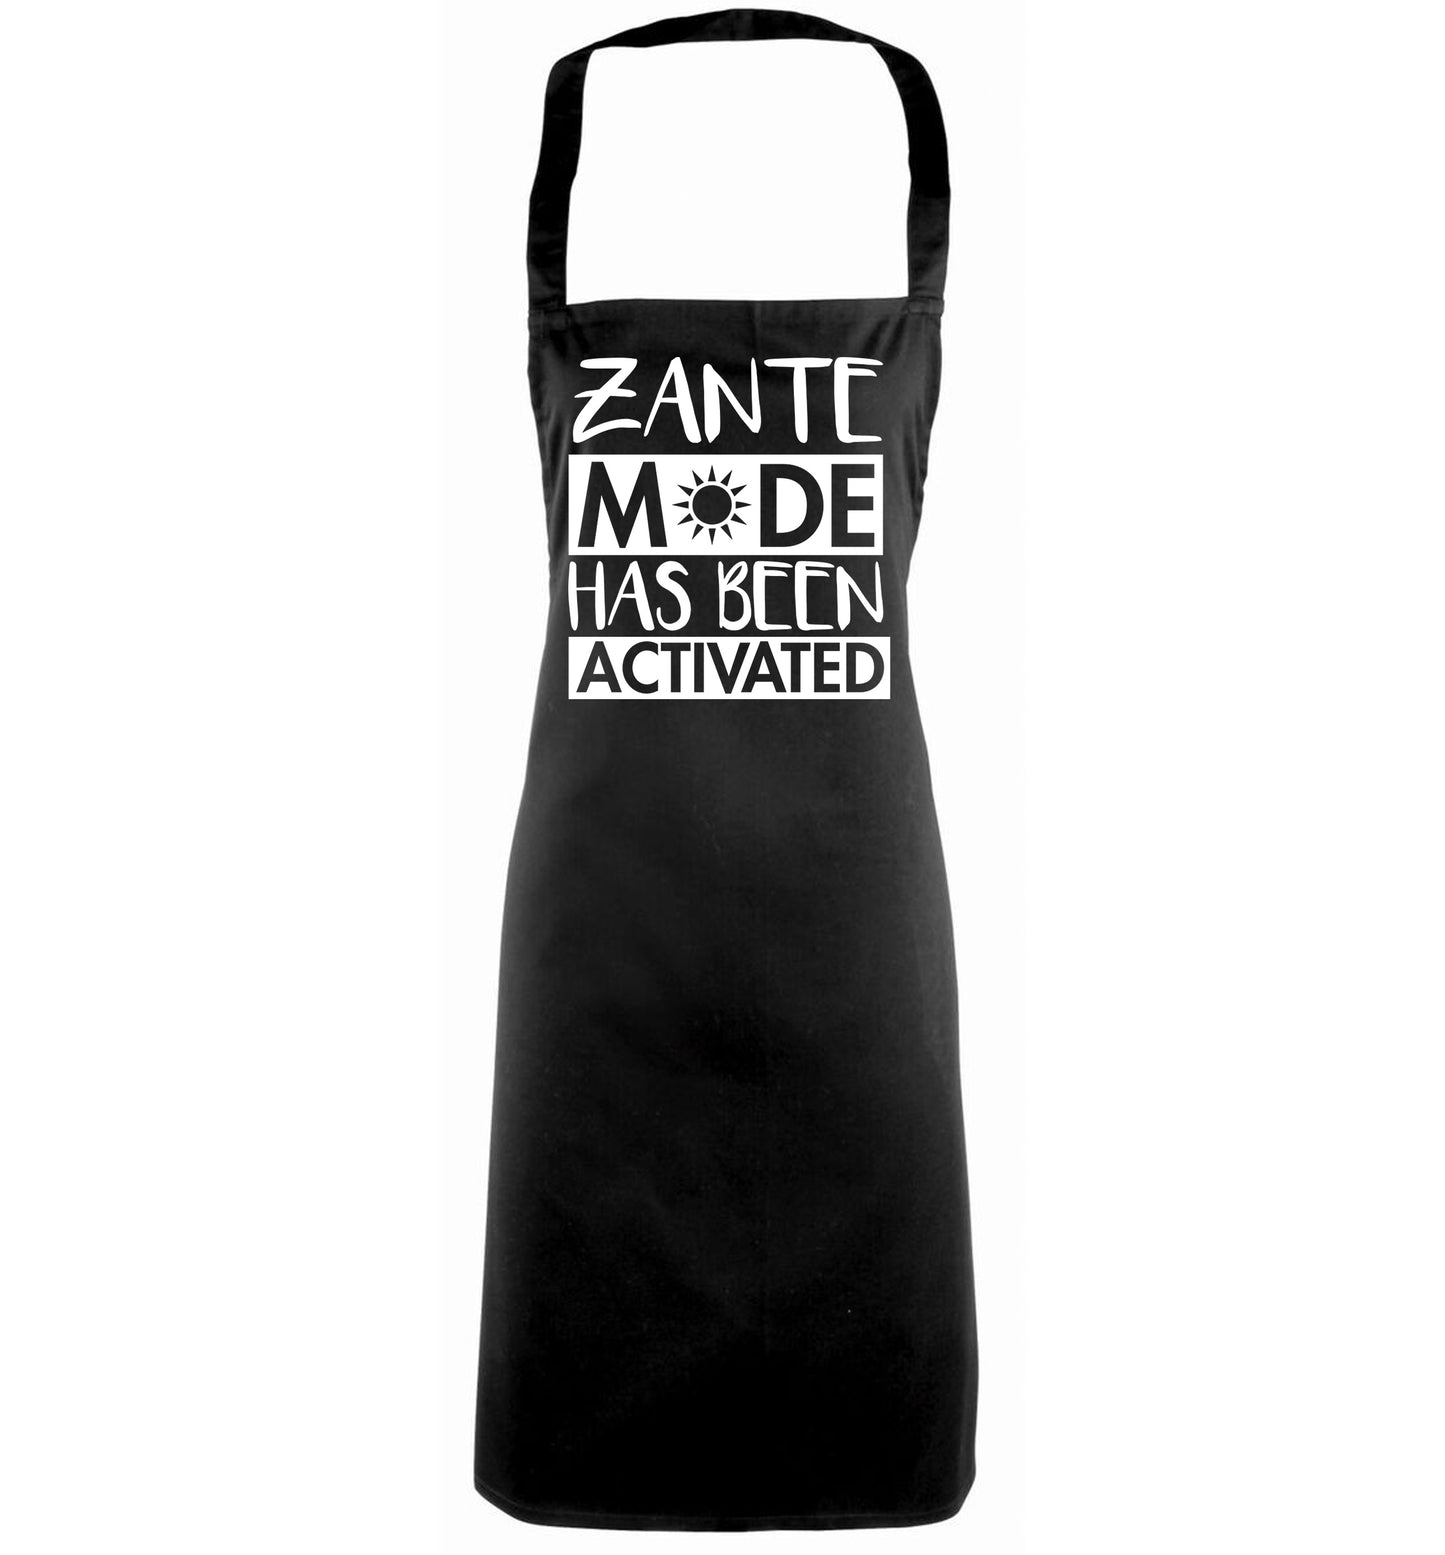 Zante mode has been activated black apron